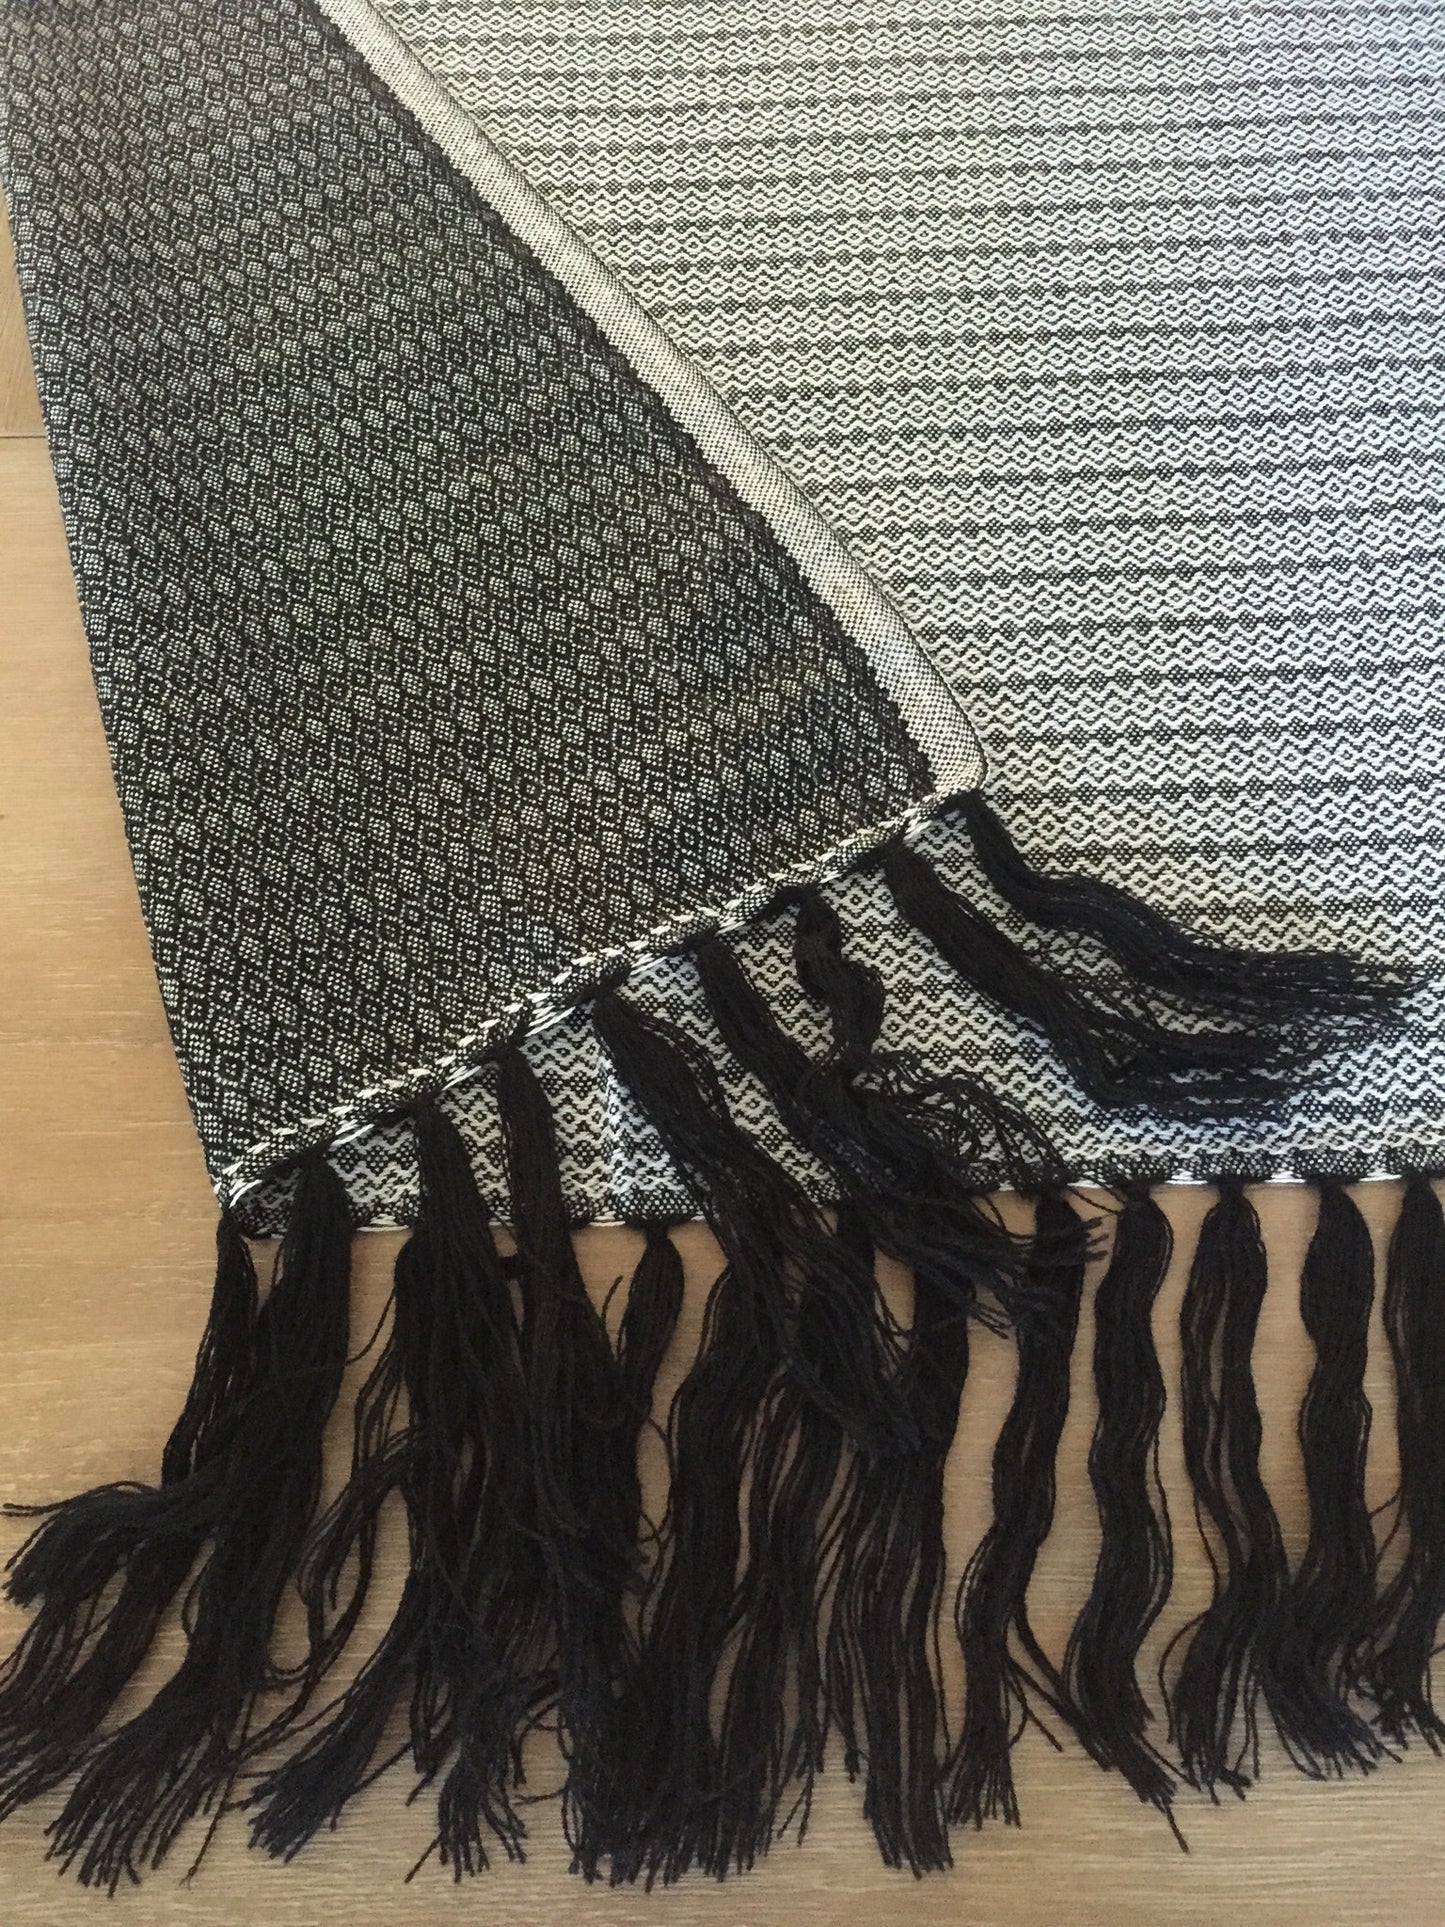 Mexican Rebozo Handwoven black and white with Fringes - MesaChic - 3